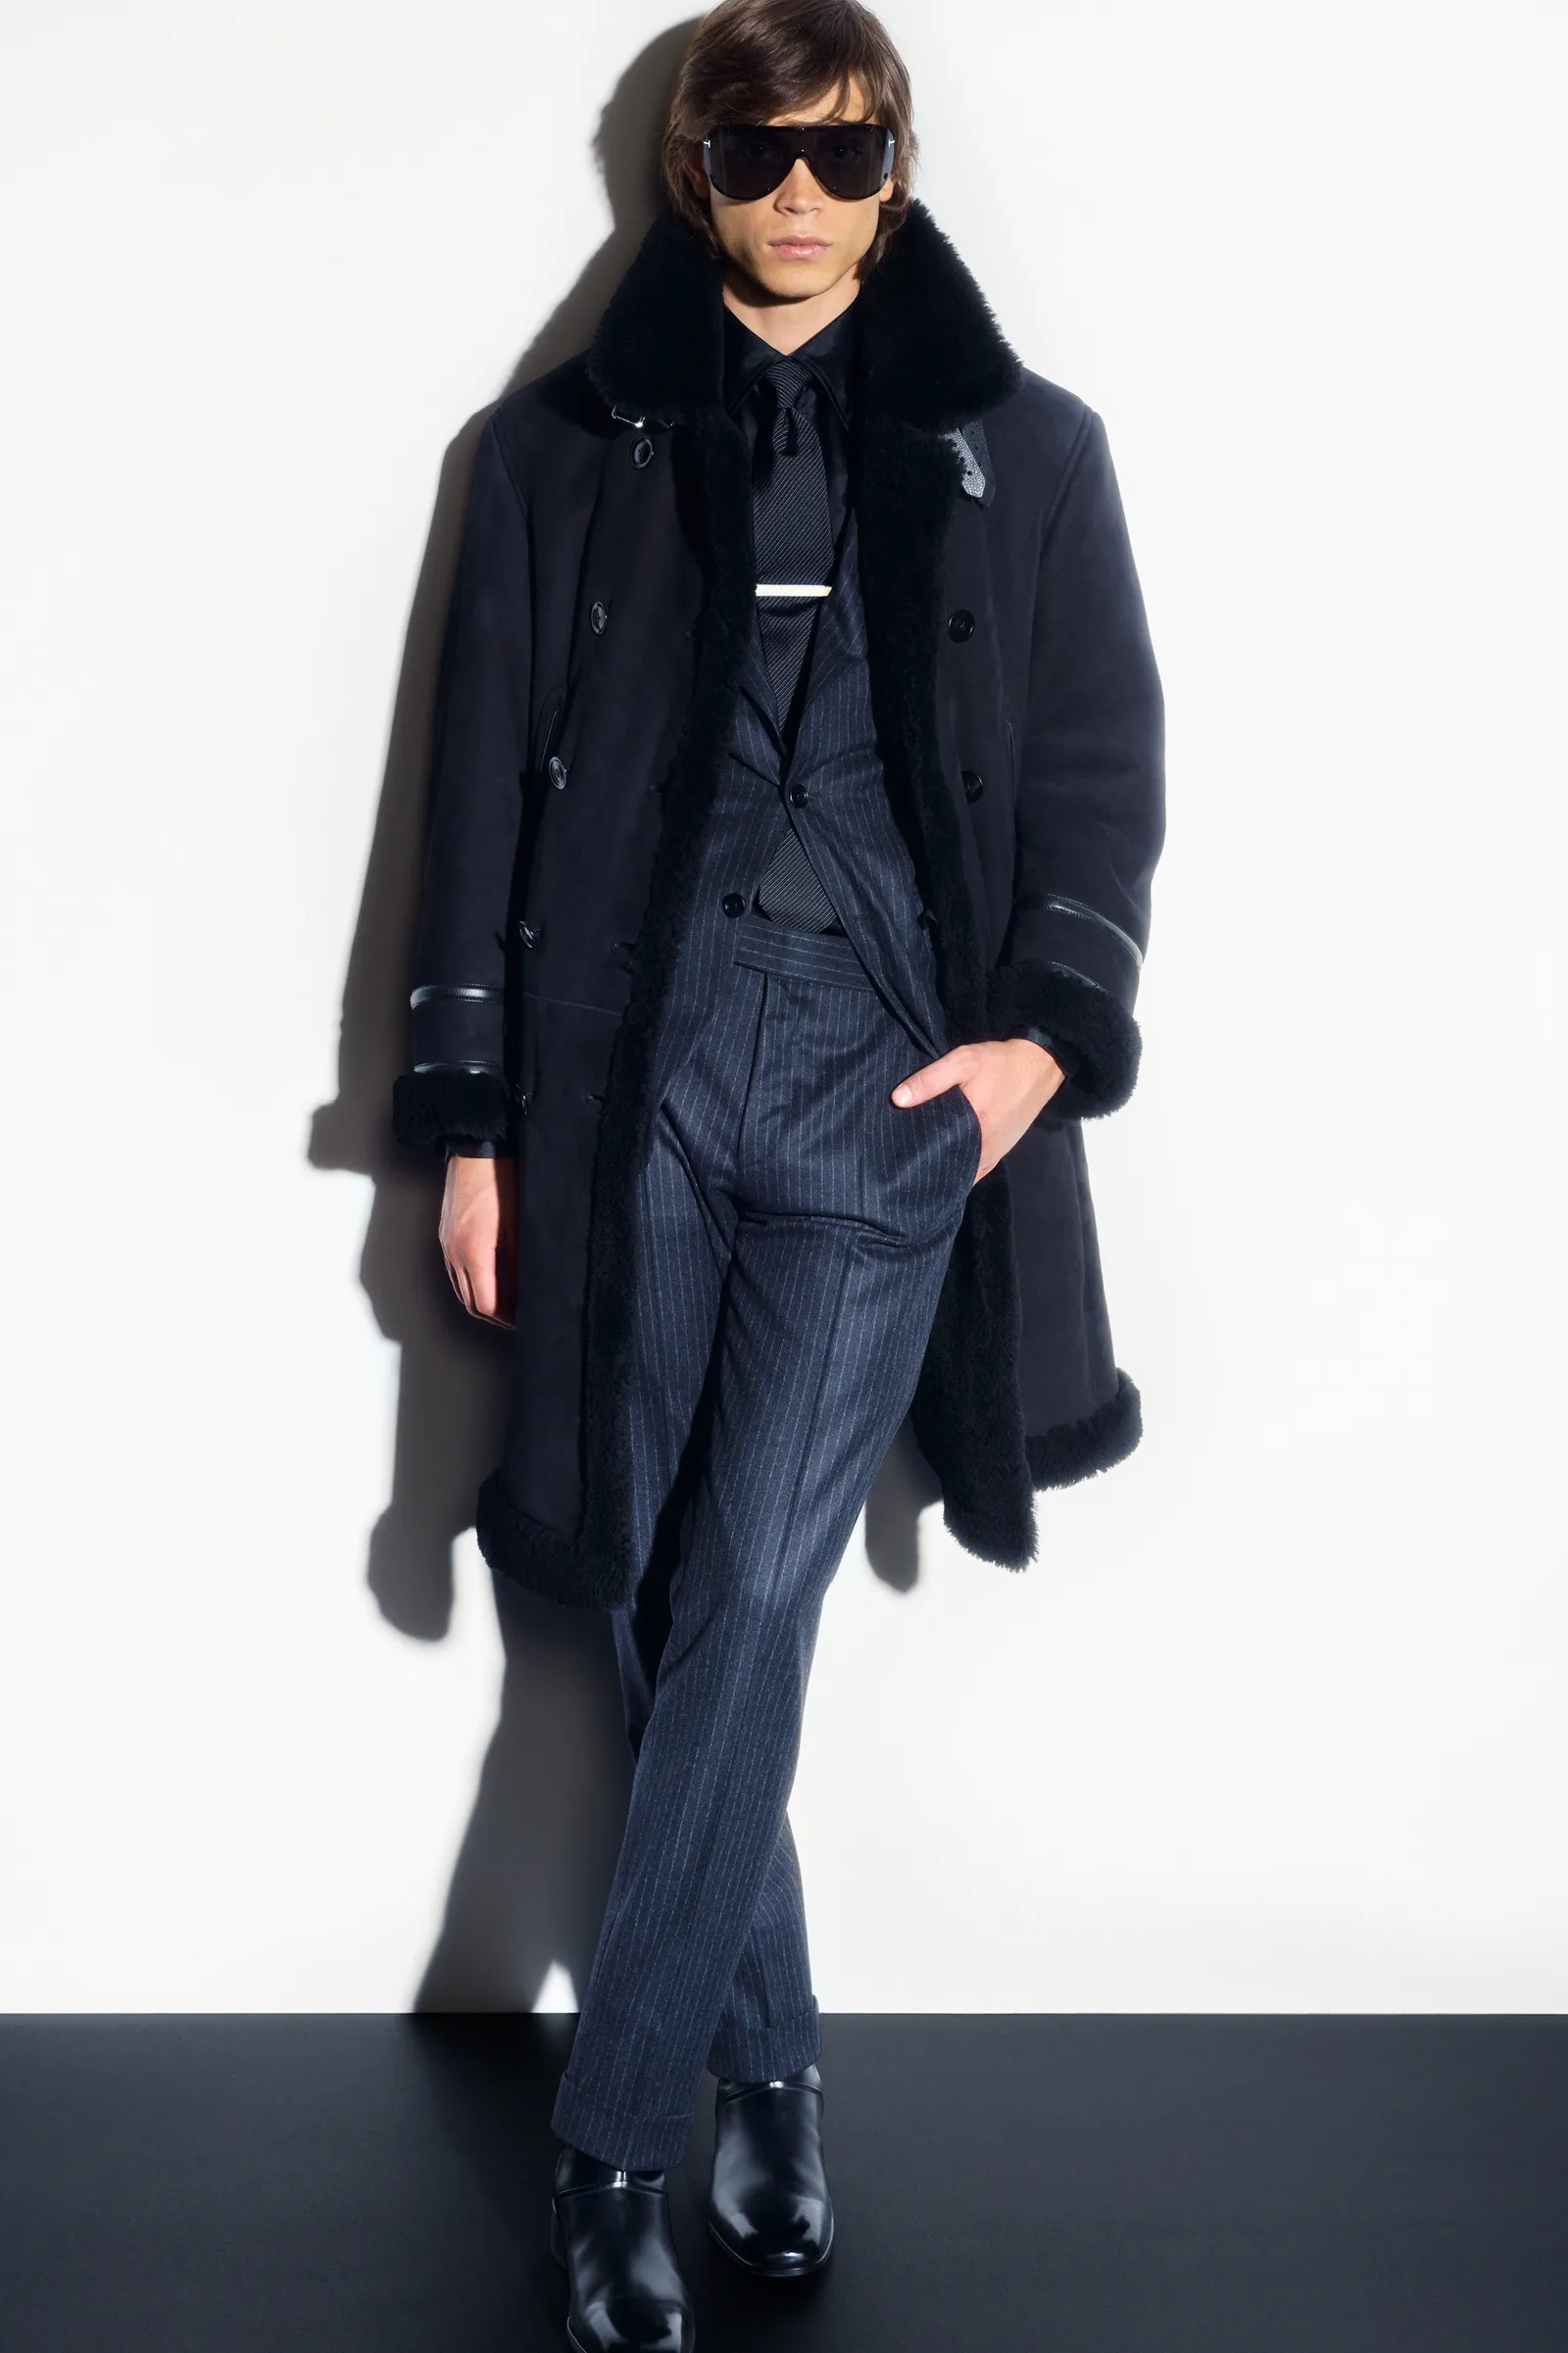 00026-tom-ford-fall-22-mens-nyc-credit-brand.png